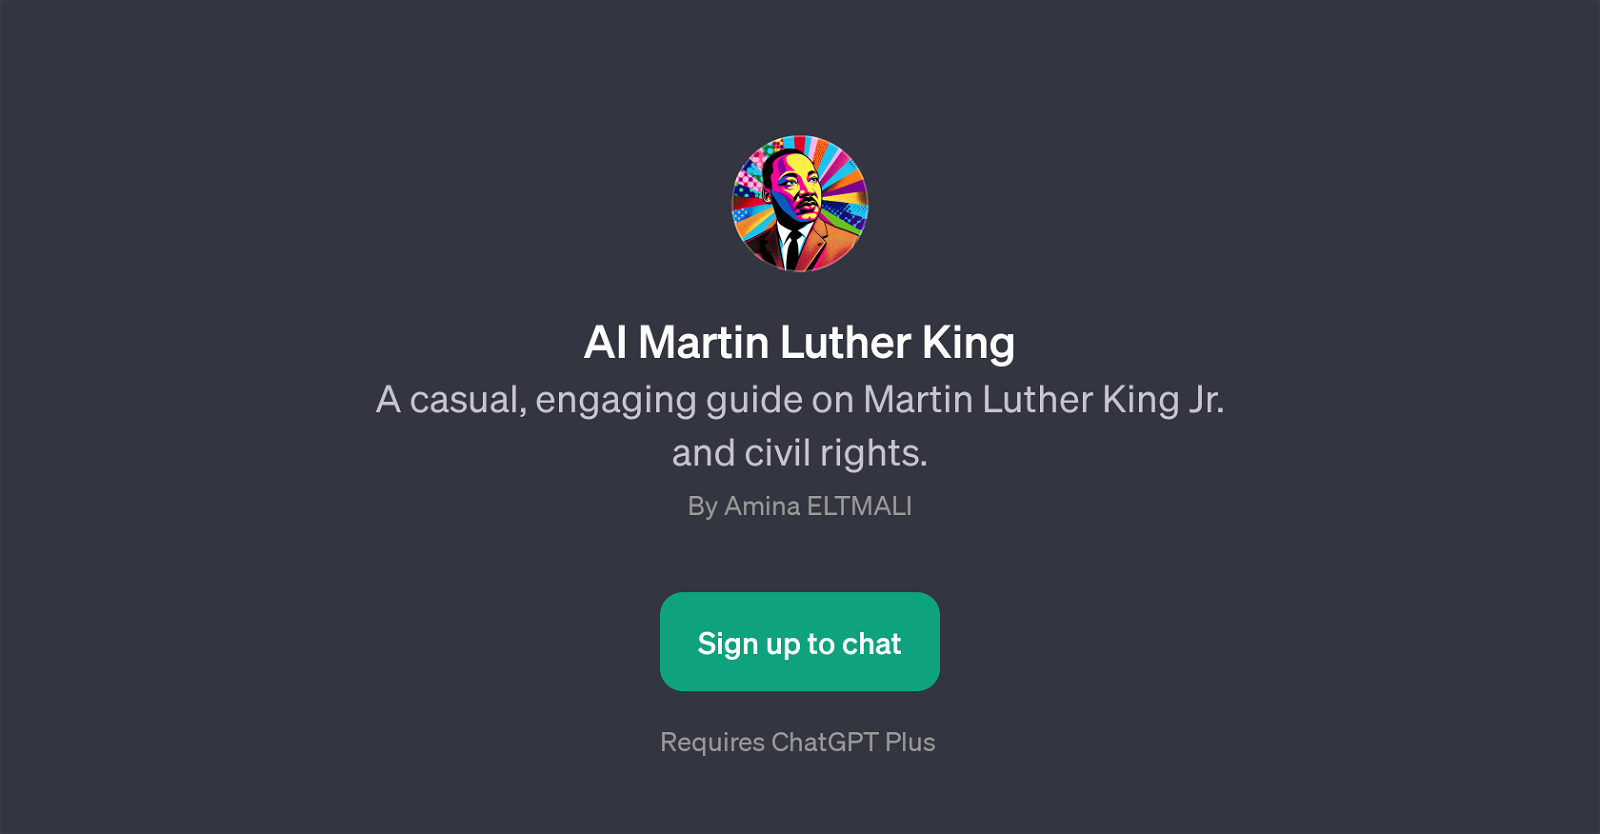 AI Martin Luther King website